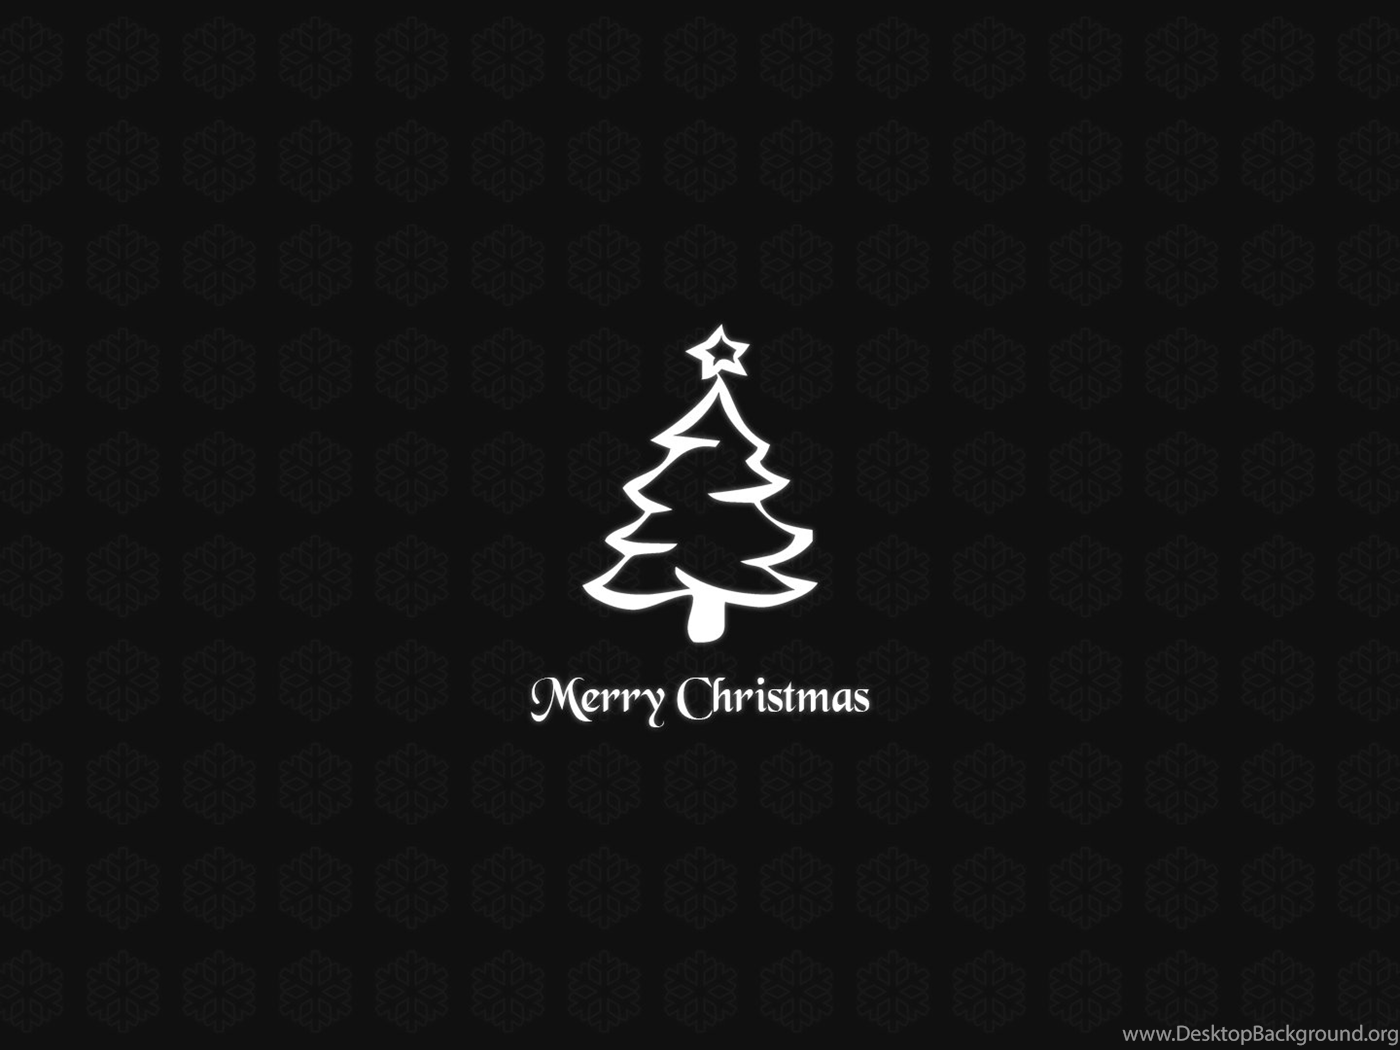 Simple Christmas Wallpaper 1920x1080 By SyntheticArts Desktop Background